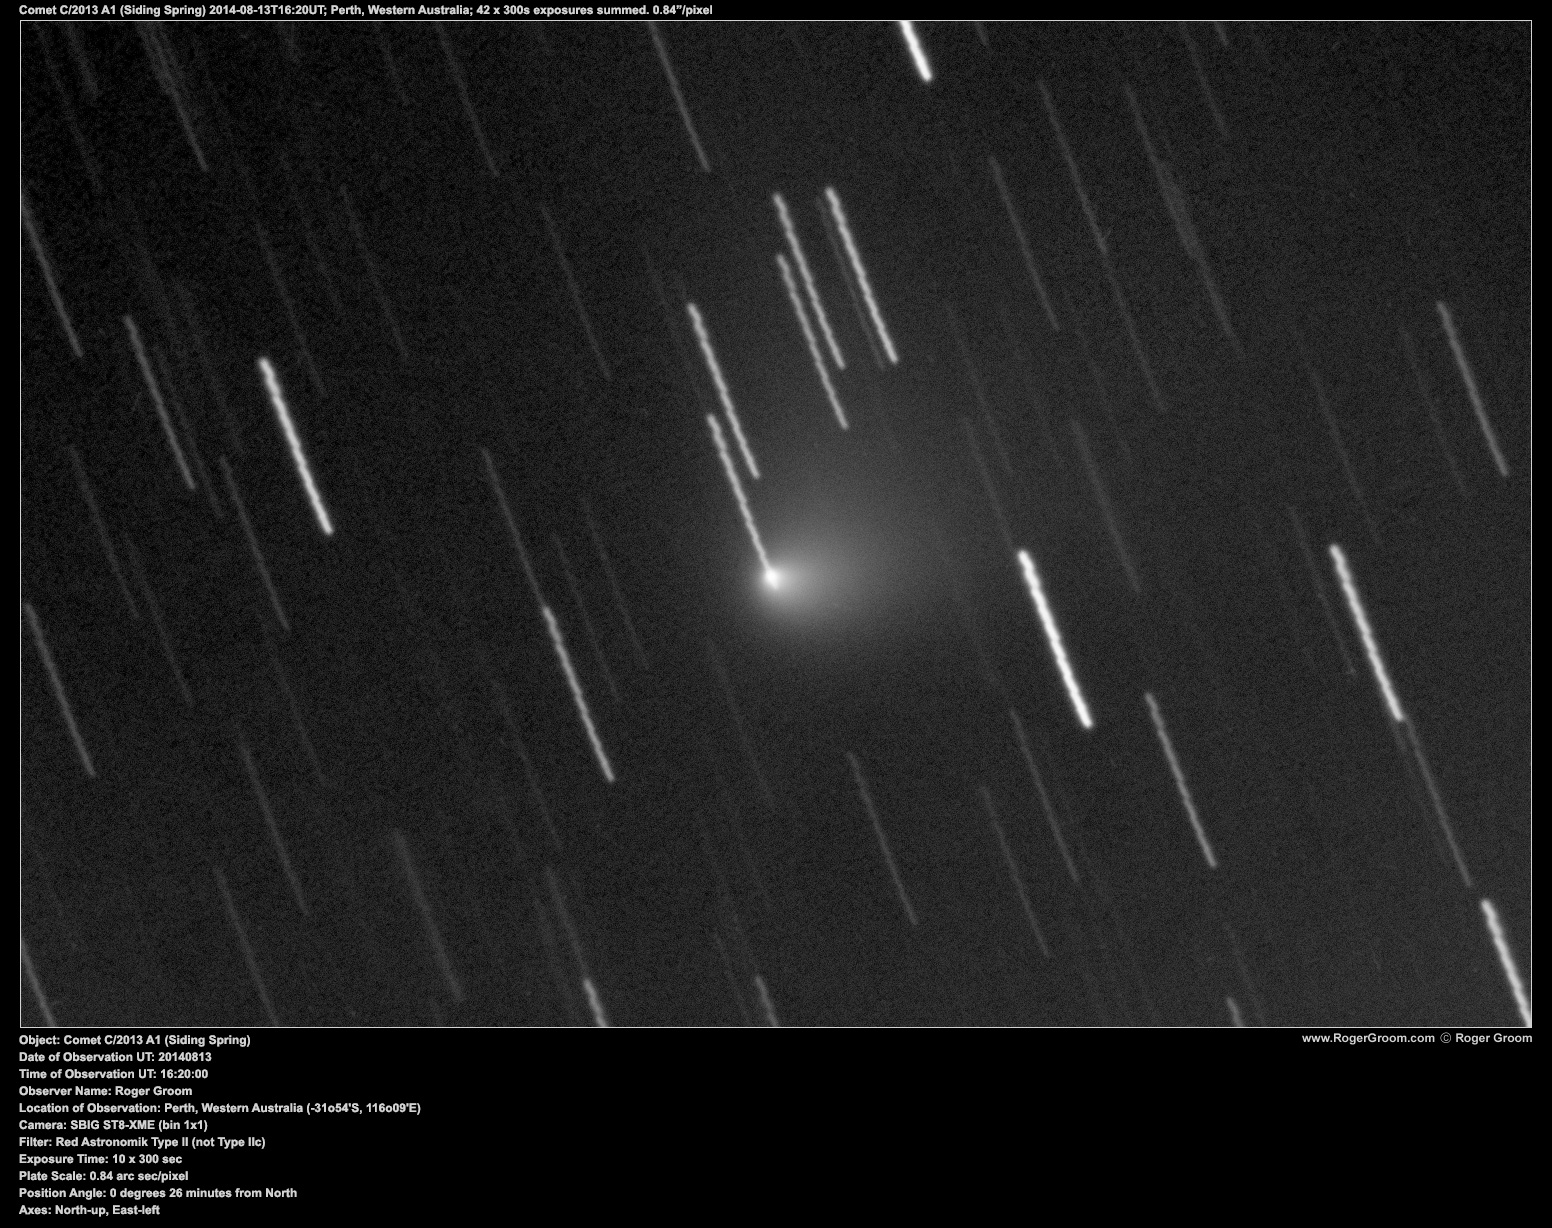 Object: Comet C/2013 A1 (Siding Spring) Date of Observation UT: 20140813 Time of Observation UT: 16:20:00 Observer Name: Roger Groom Location of Observation: Perth, Western Australia (-31o54'S, 116o09'E) Camera: SBIG ST8-XME (bin 1x1) Filter: Red Astronomik Type II (not Type IIc) Exposure Time: 42 x 300 sec Plate Scale: 0.84 arc sec/pixel Position Angle: 0 degrees 26 minutes from North Axes: North-up, East-left